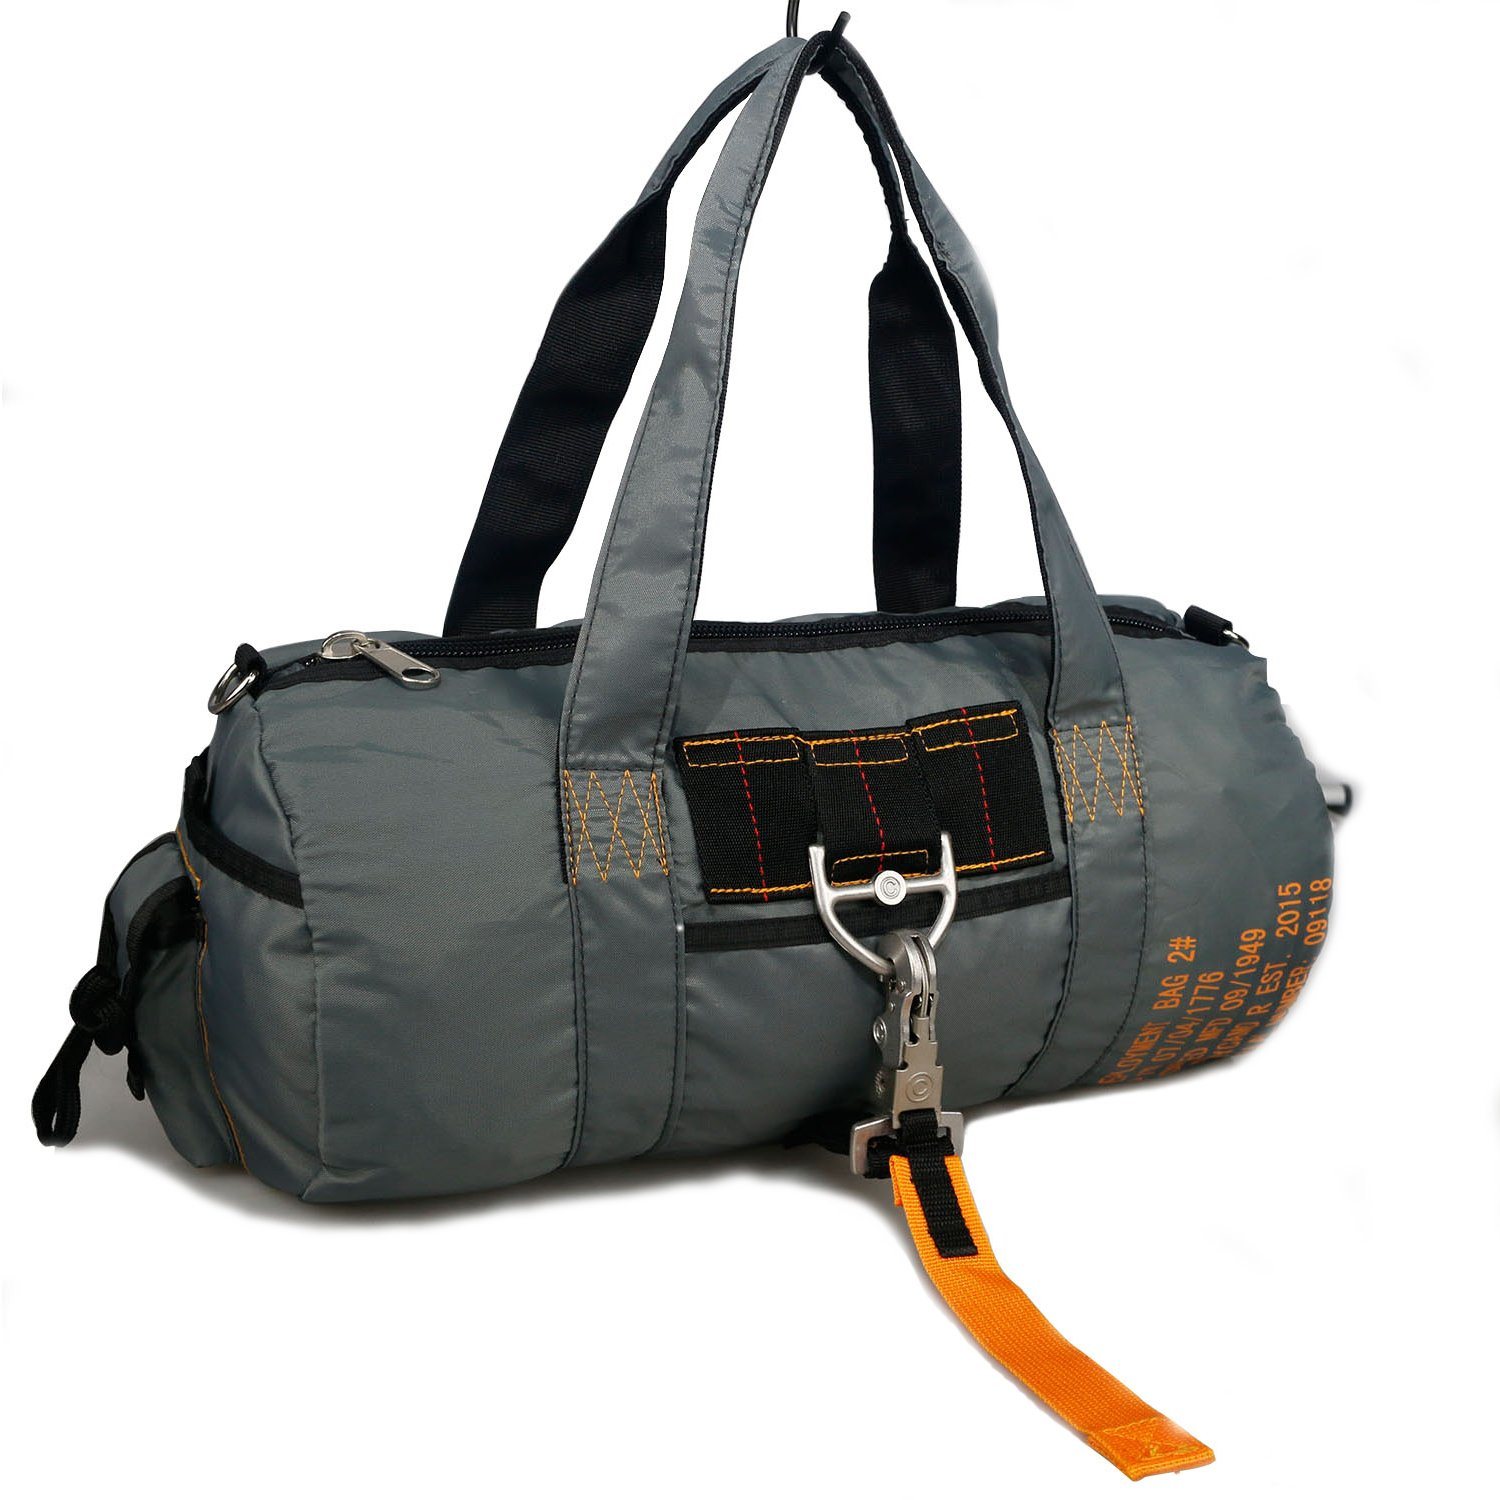 Duffle Lightweight Parachute Tactical Sling Bag for Outdoor Hiking Camping